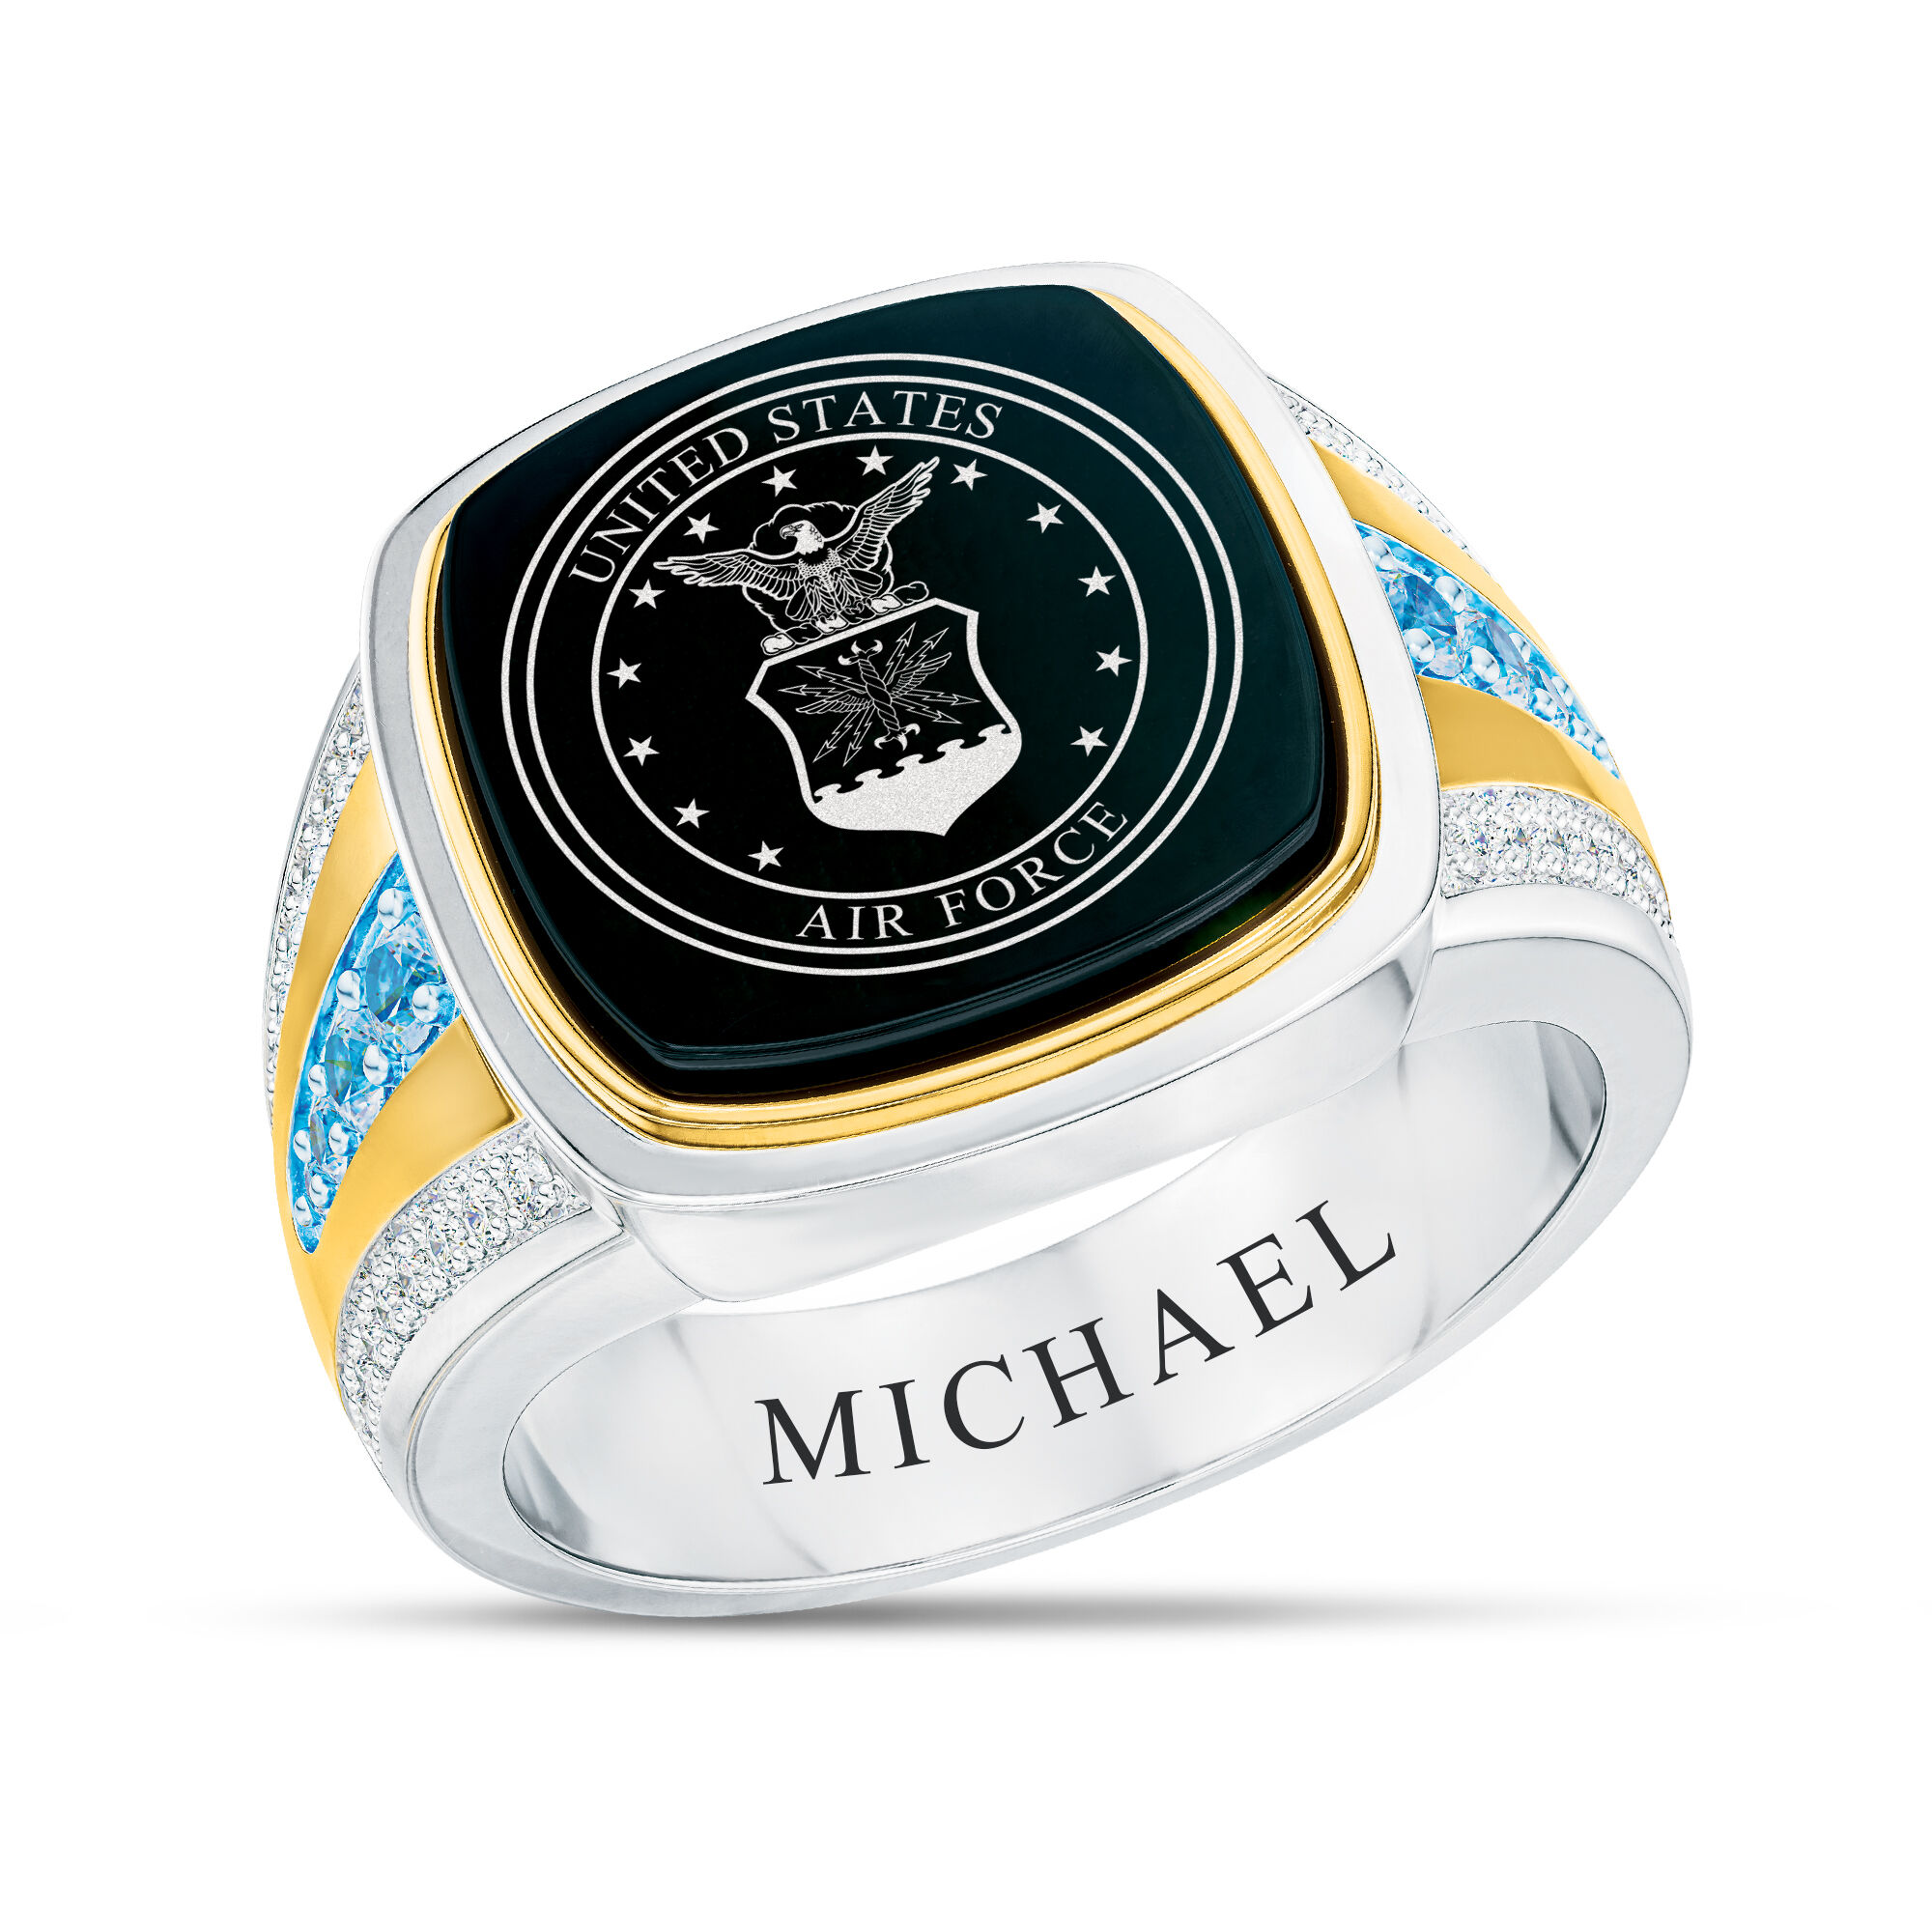 The US Air Force Birthstone Ring 10347 0043 l december